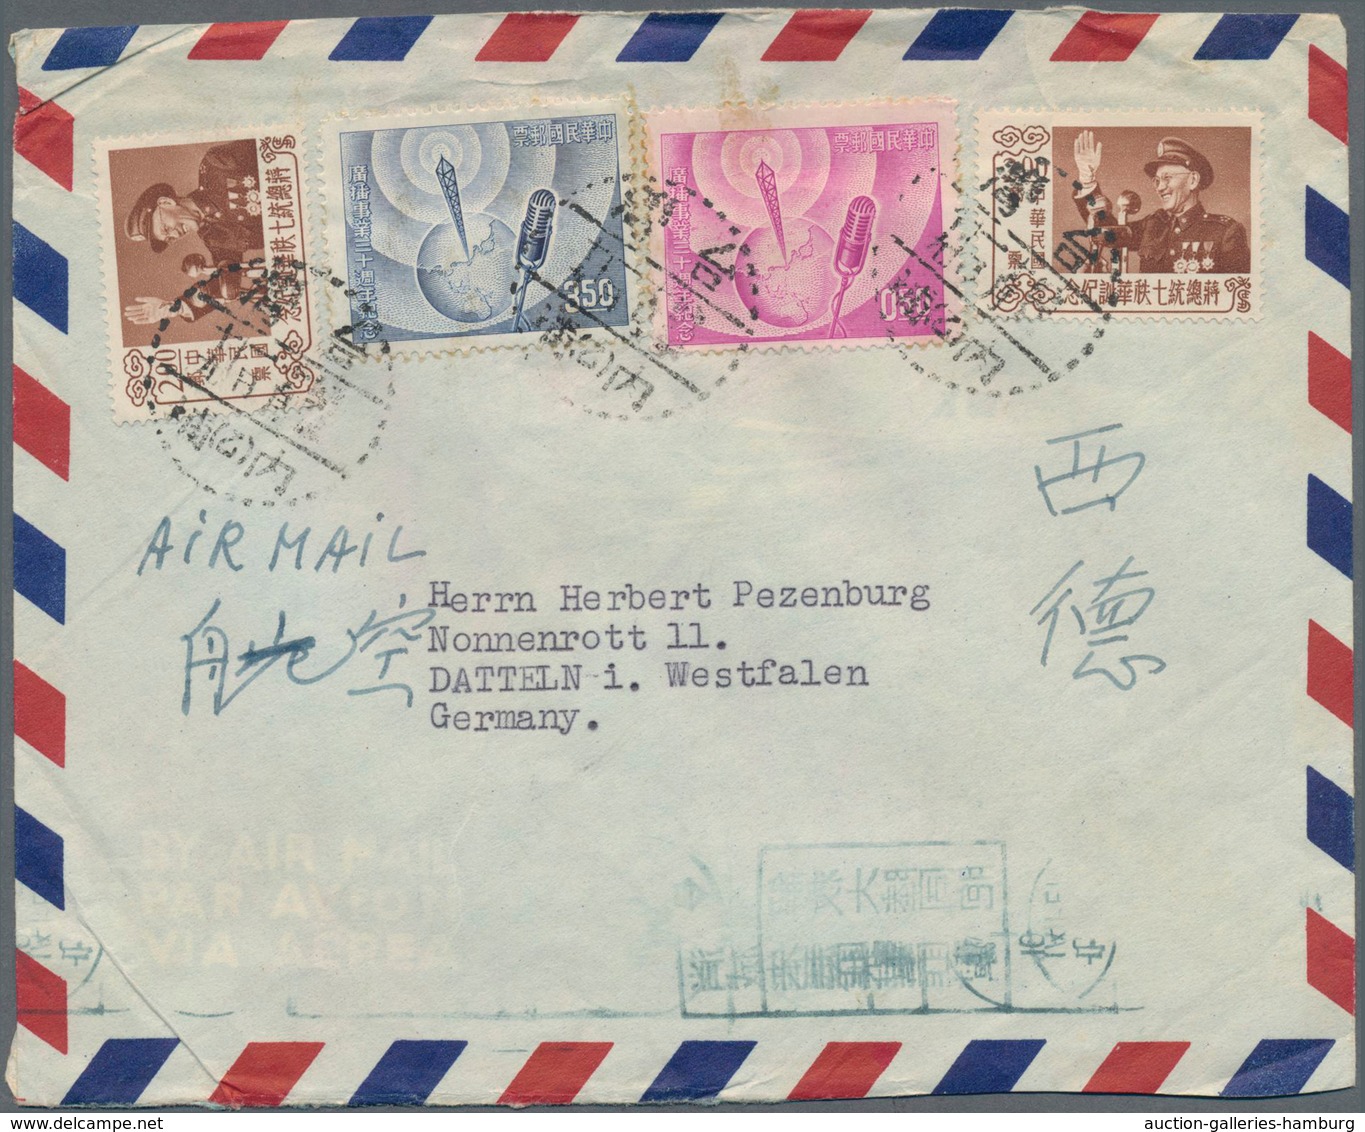 China - Taiwan (Formosa): 1958/80, covers (66) mostly by air mail to Germany or US, some inland and